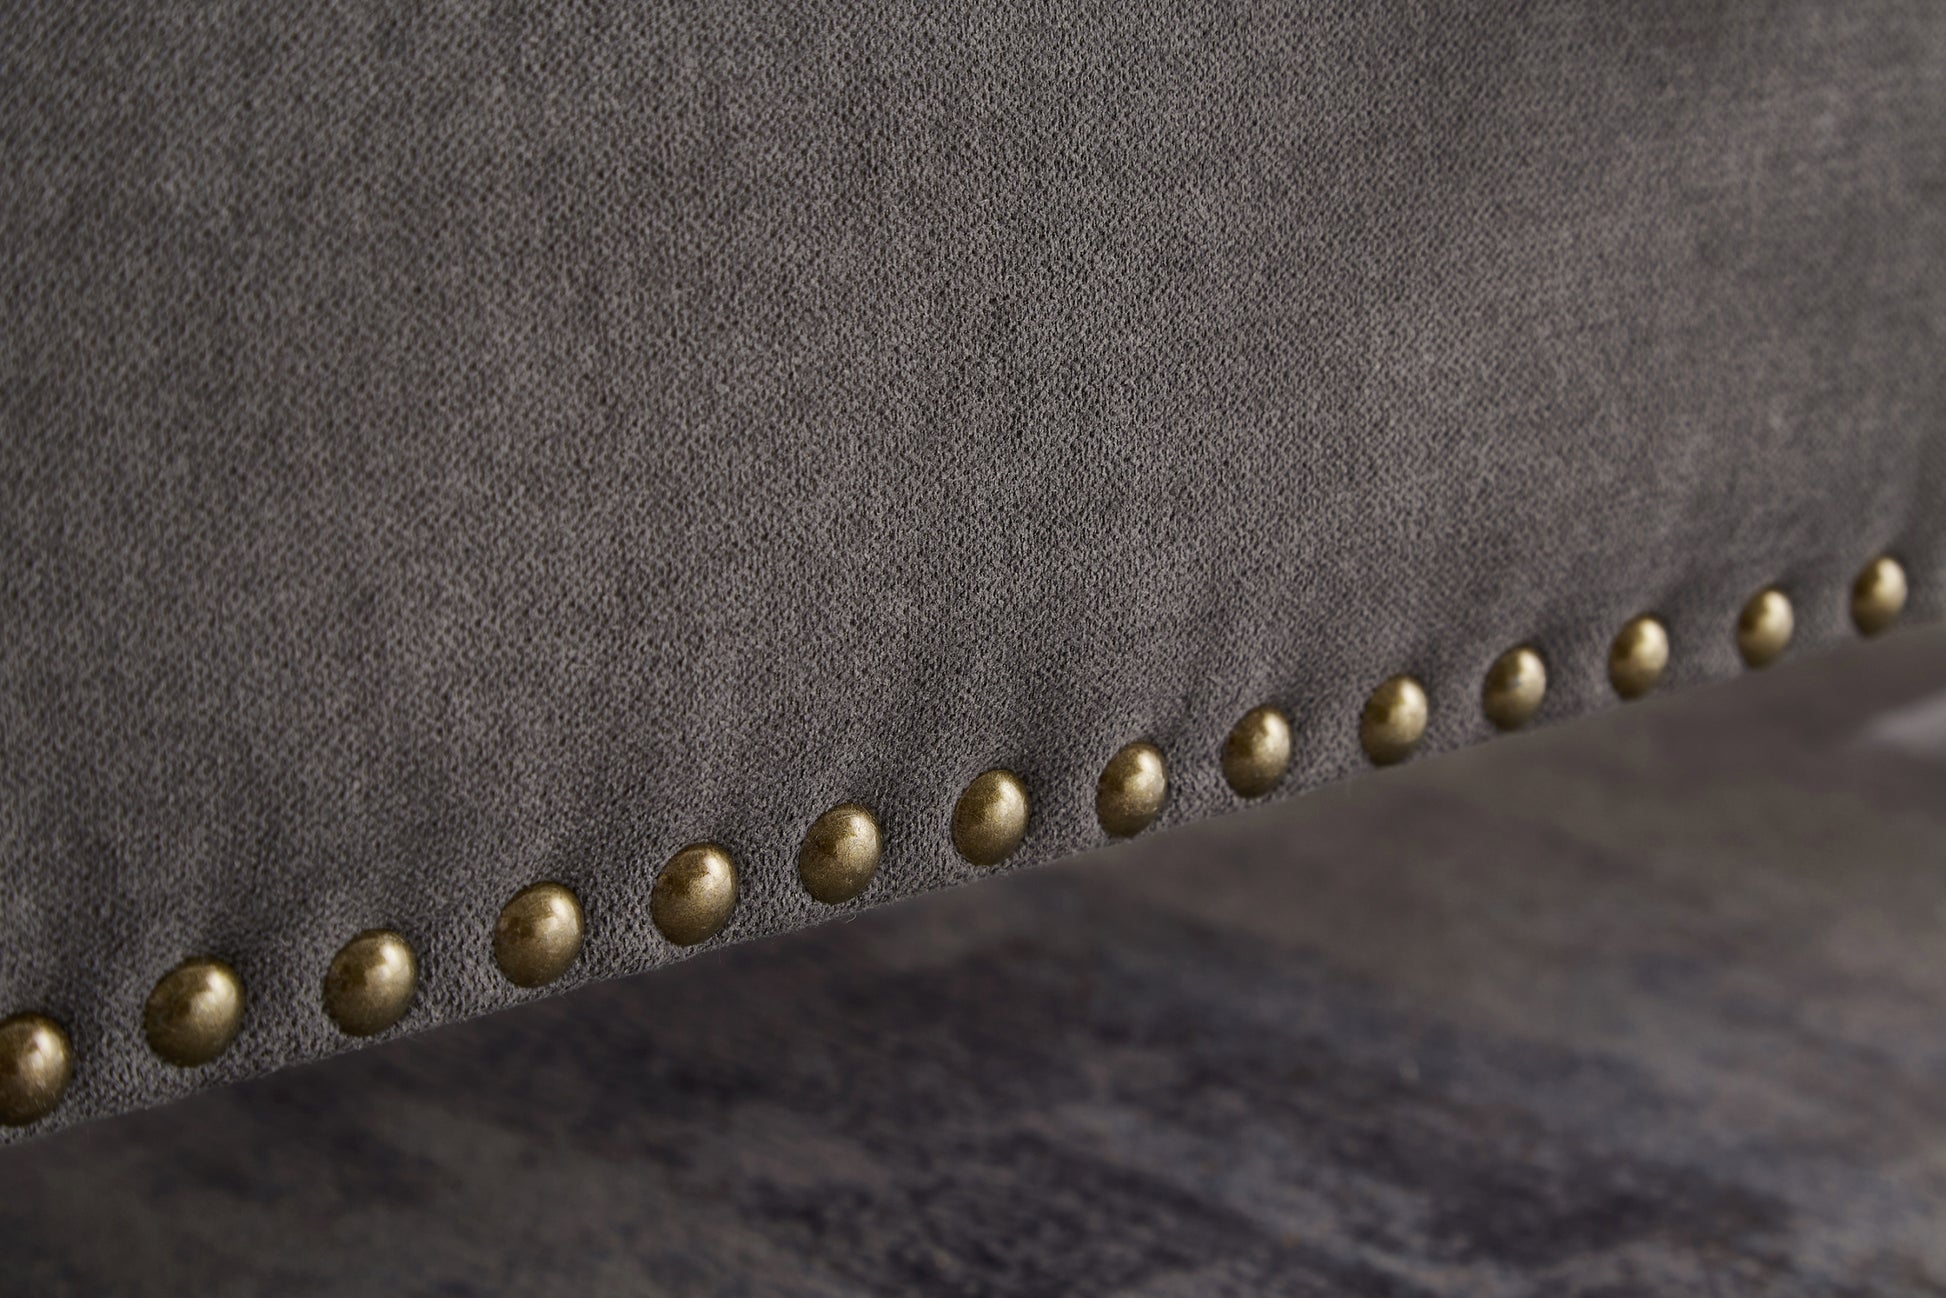 59" Bed Bench with Storage Grey Fabric grey-foam-cotton linen